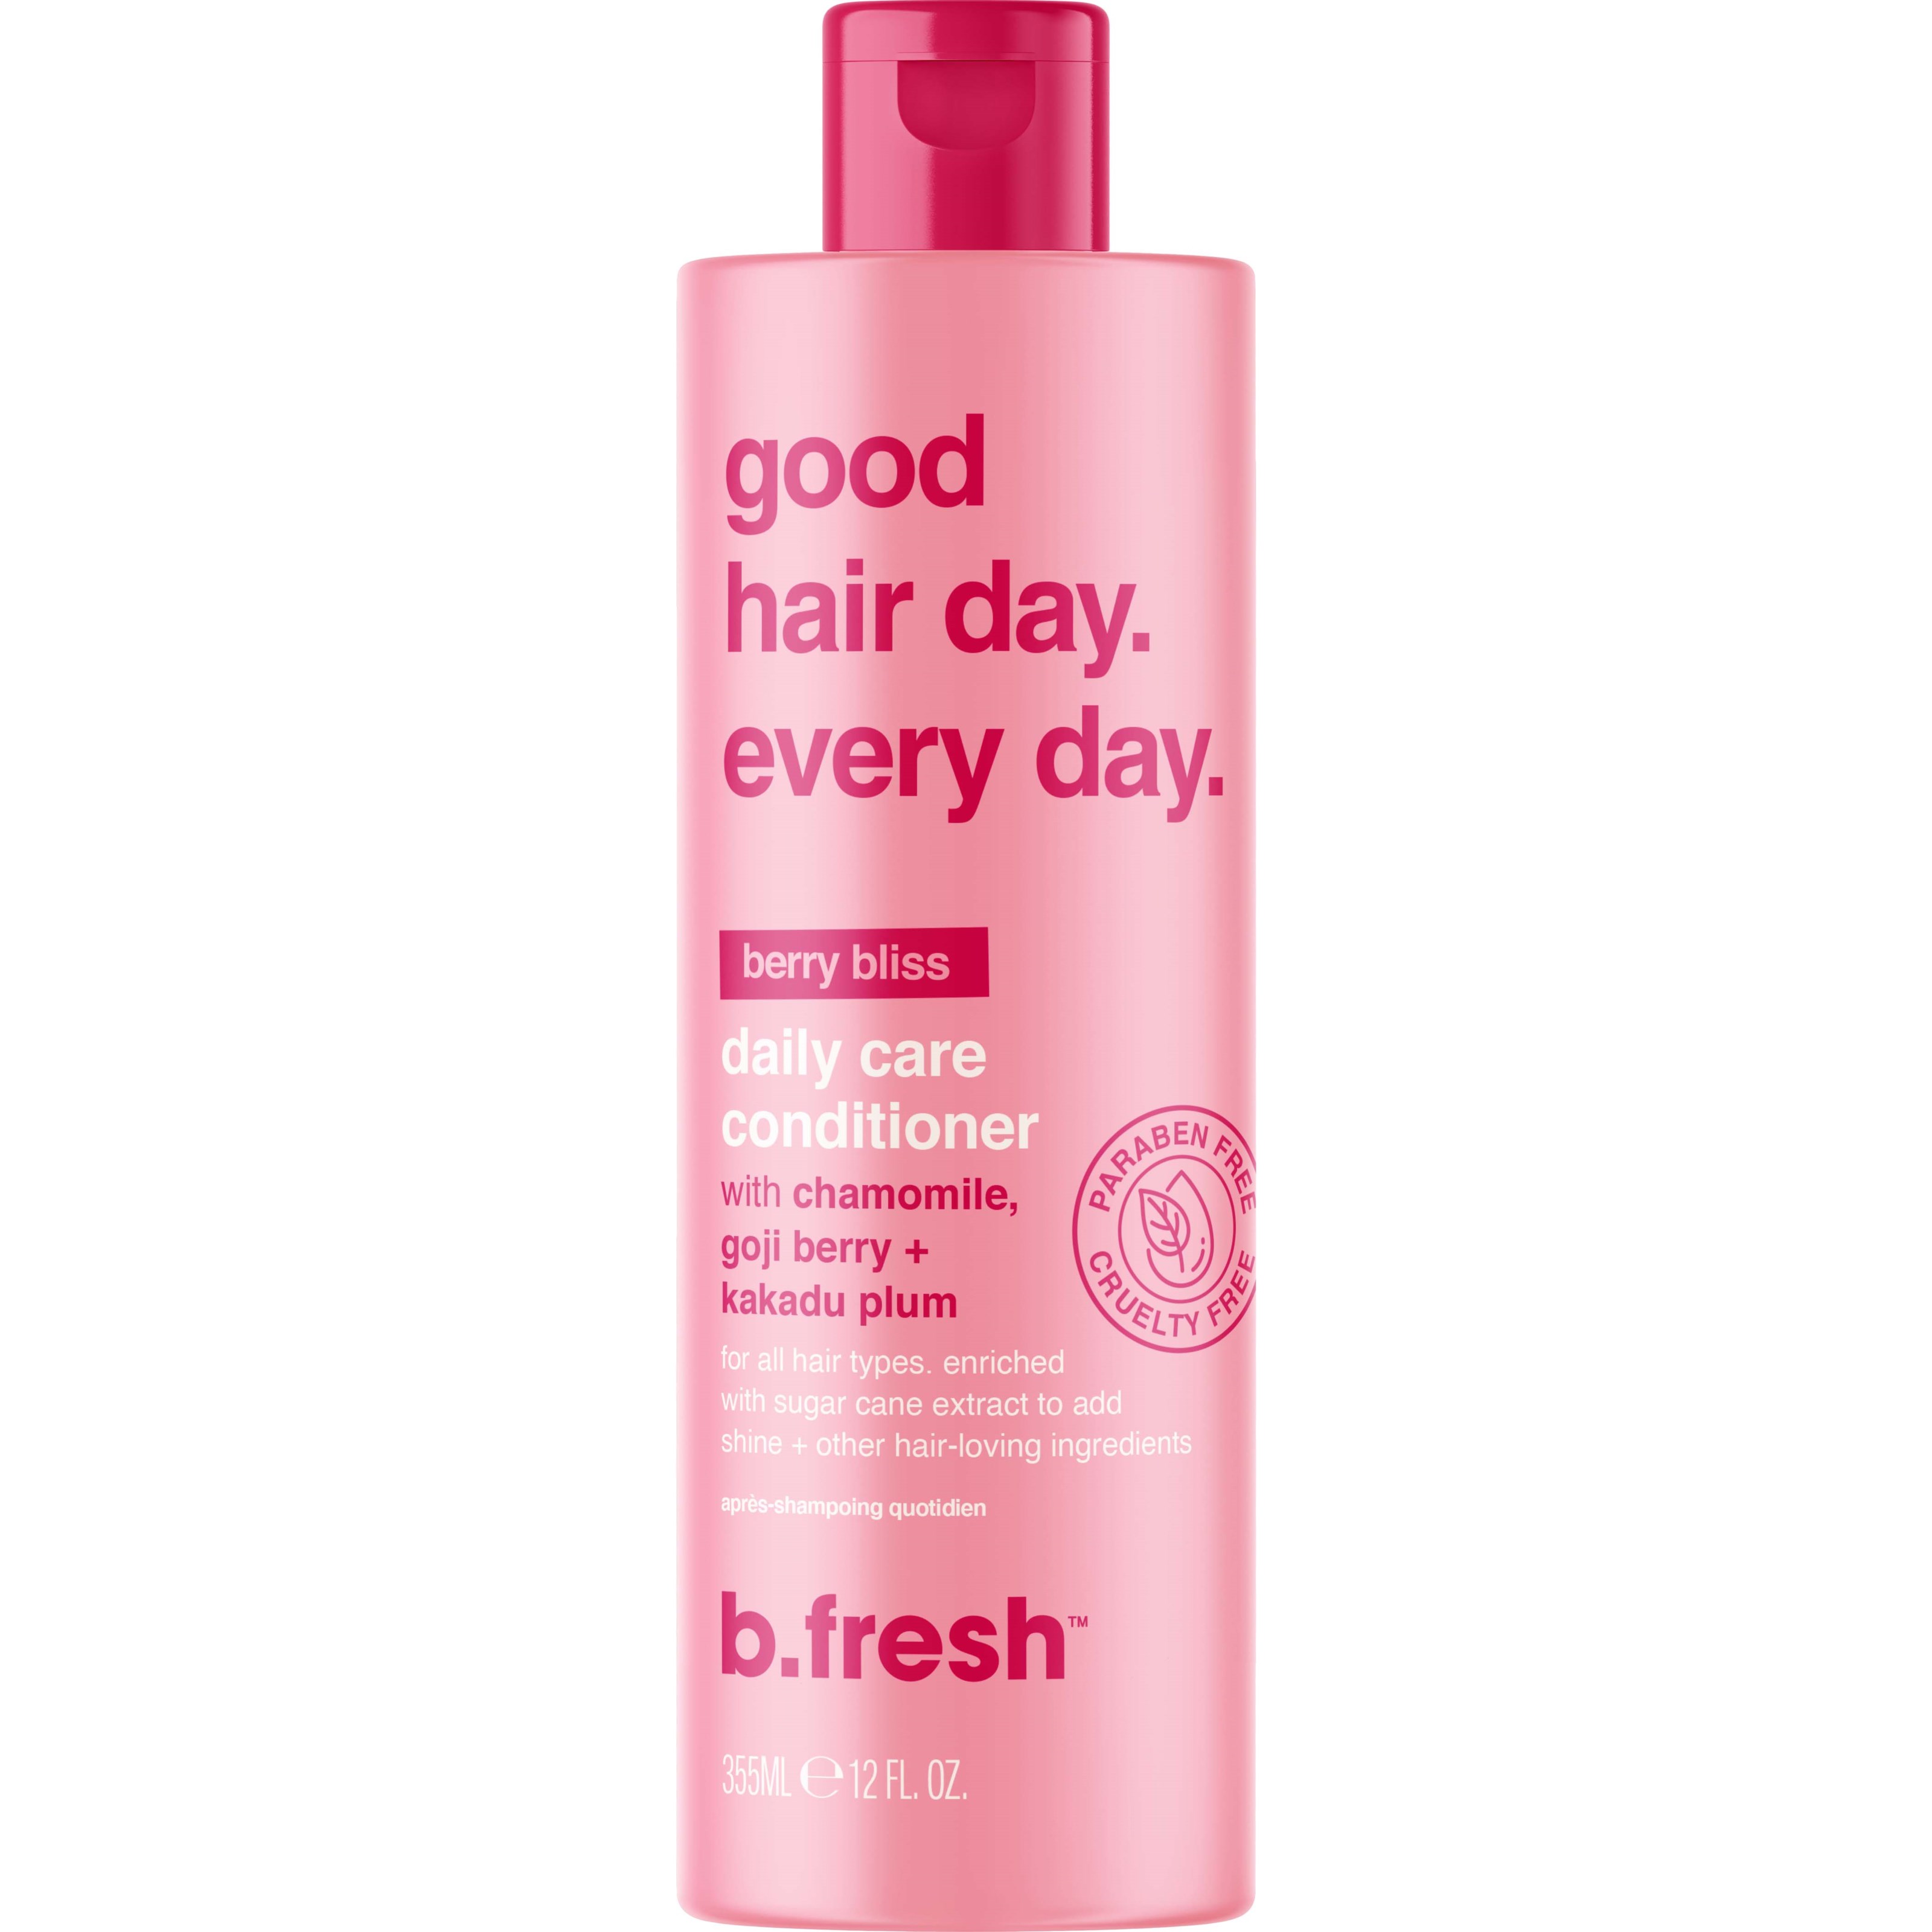 Läs mer om b.fresh Good hair day. every day daily care conditioner 355 ml